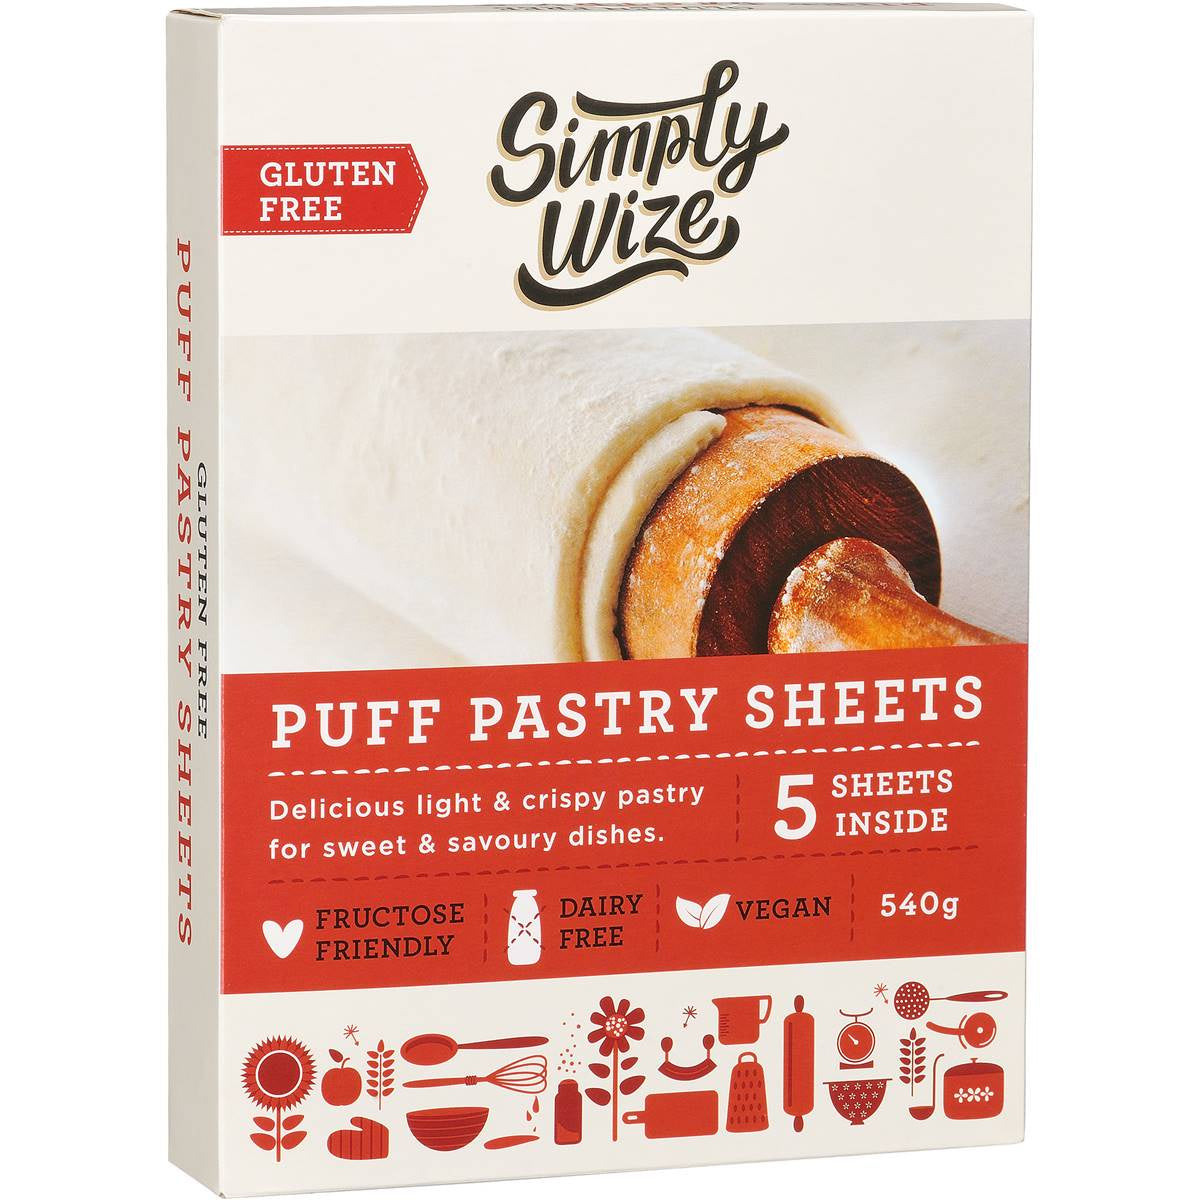 Simply Wize Gluten Free Puff Pastry 5 sheets 540g